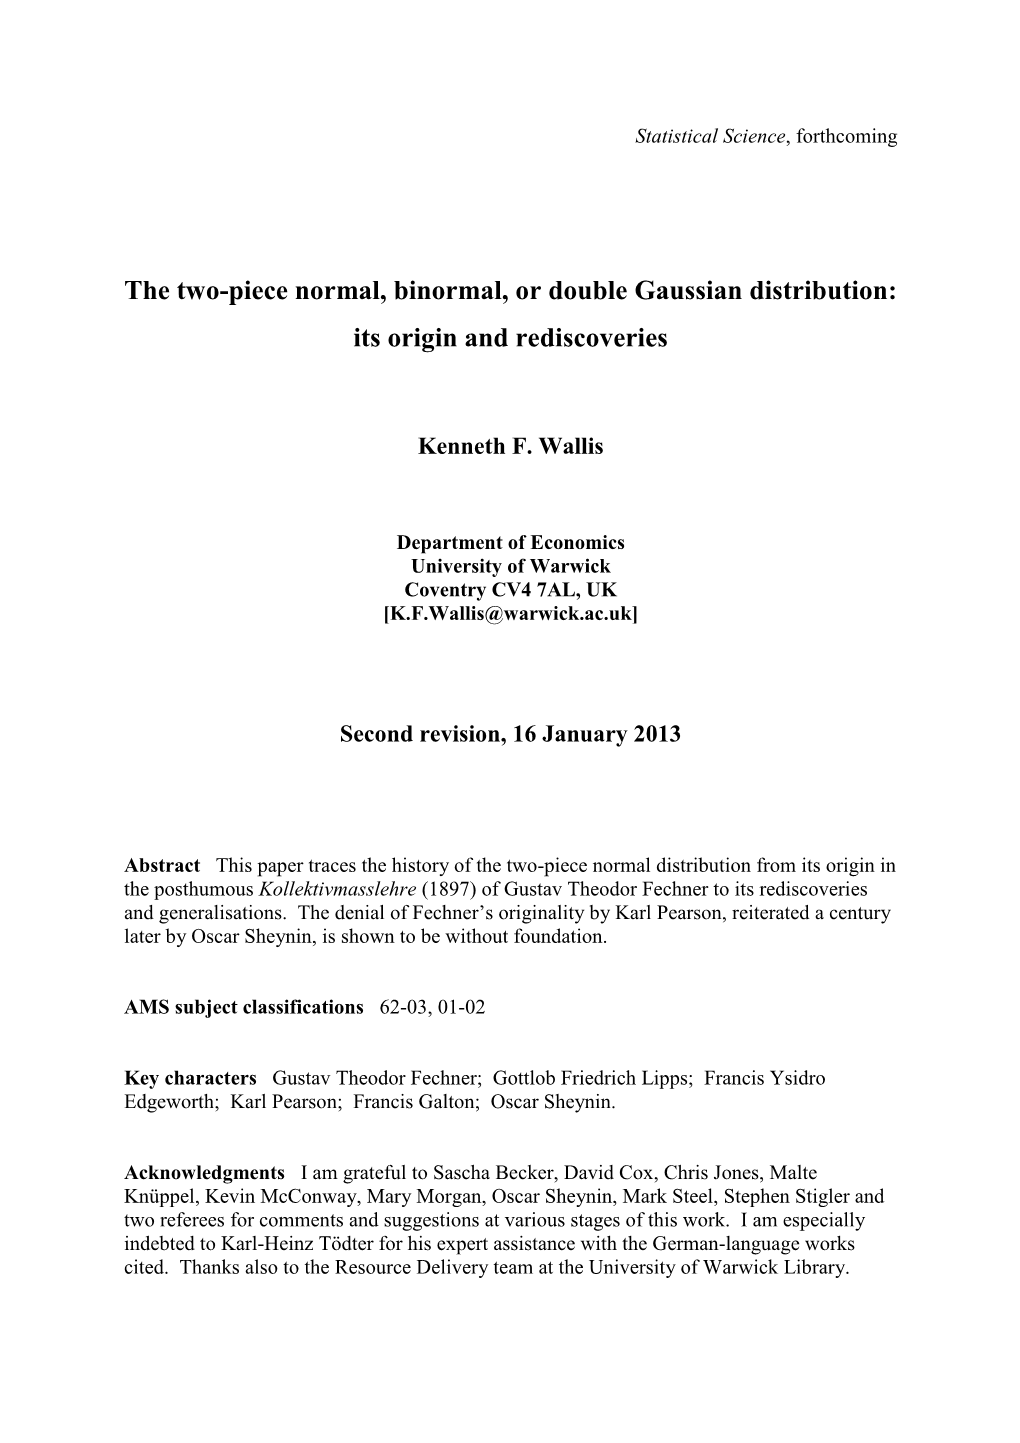 The Two-Piece Normal, Binormal, Or Double Gaussian Distribution: Its Origin and Rediscoveries